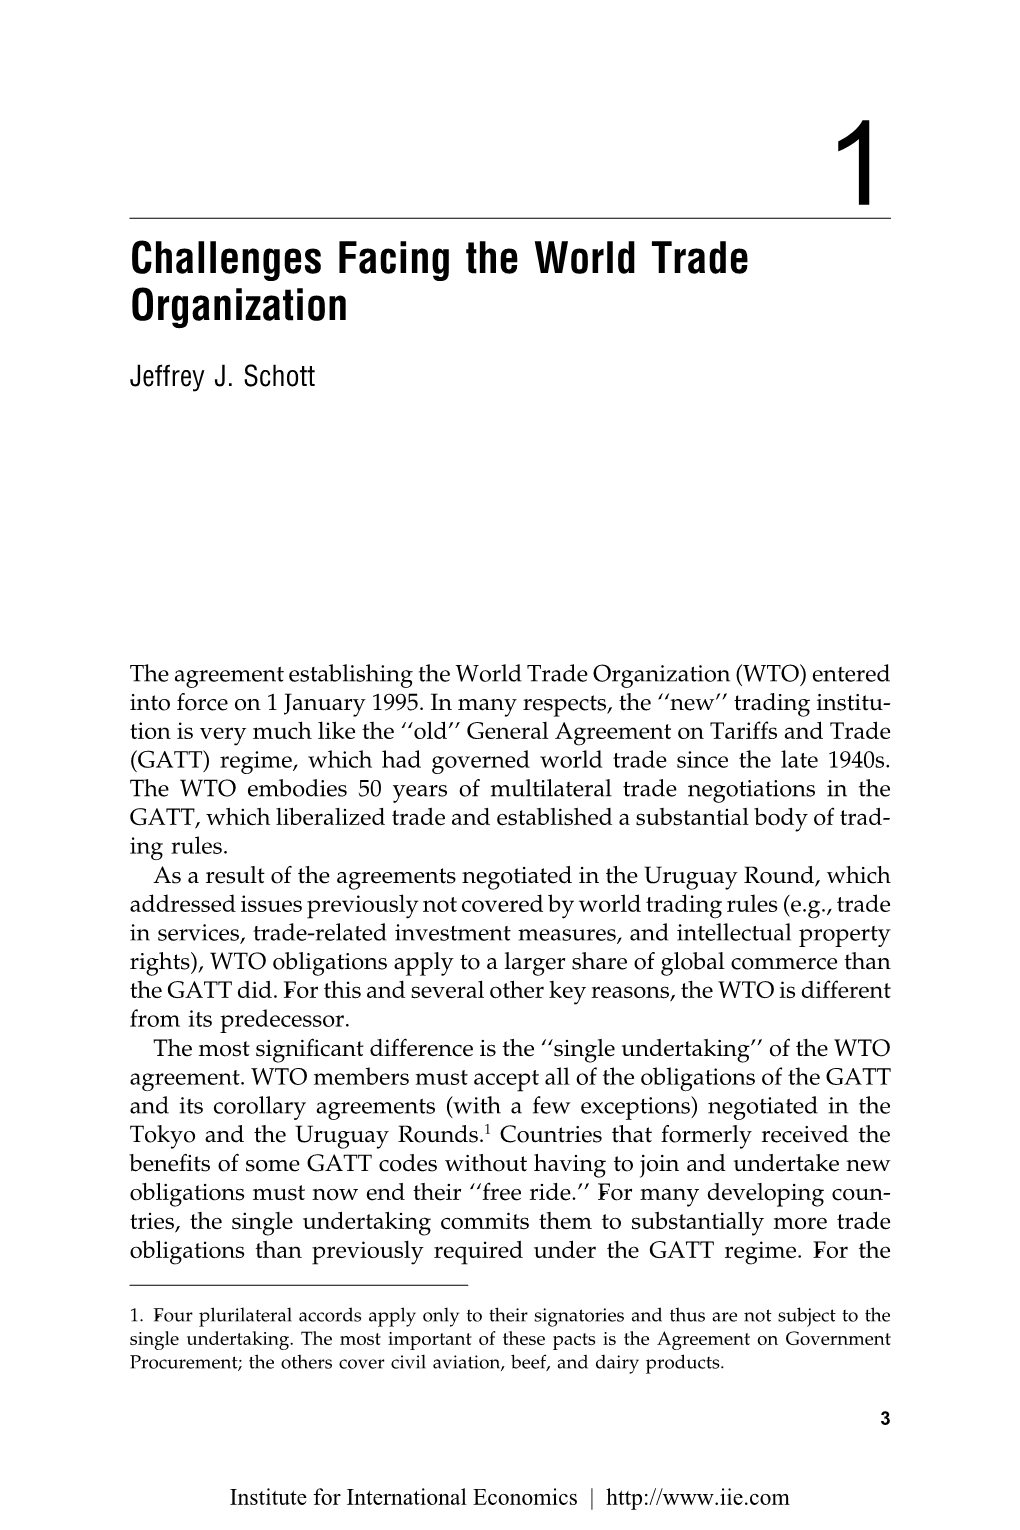 Challenges Facing the World Trade Organization